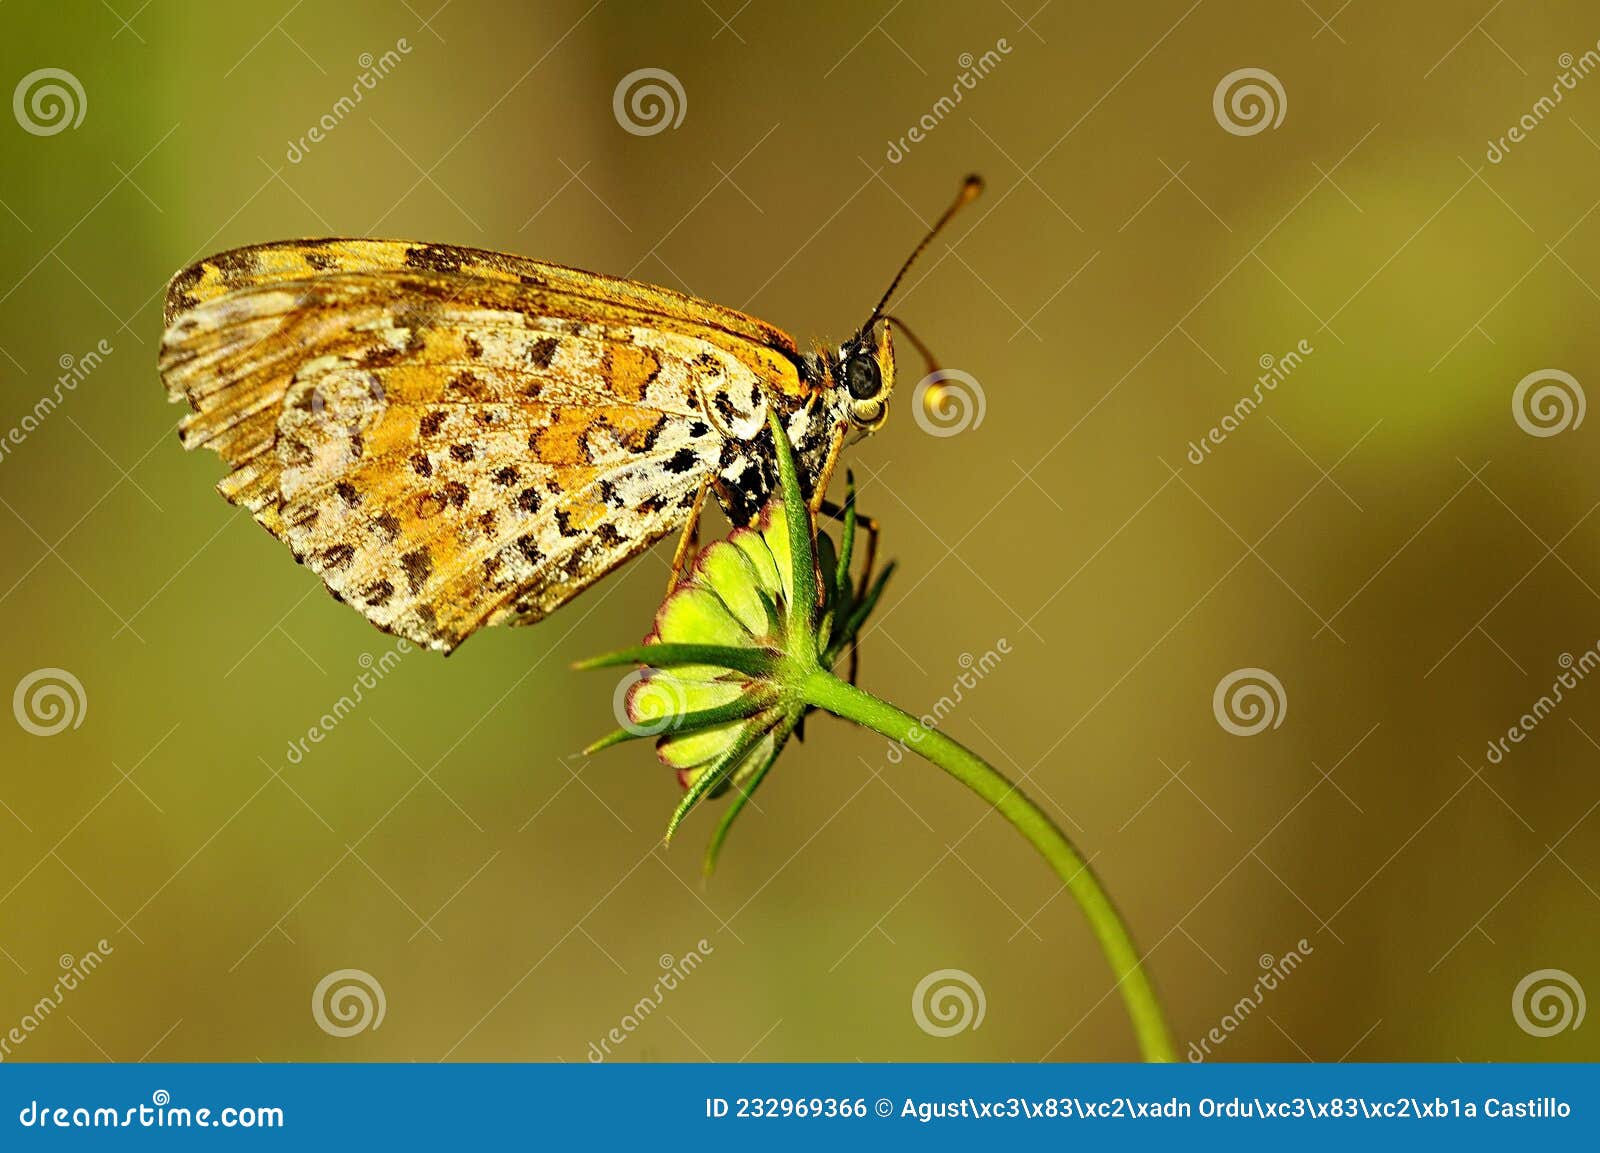 day butterfly perched on flower, melitaea aetherie